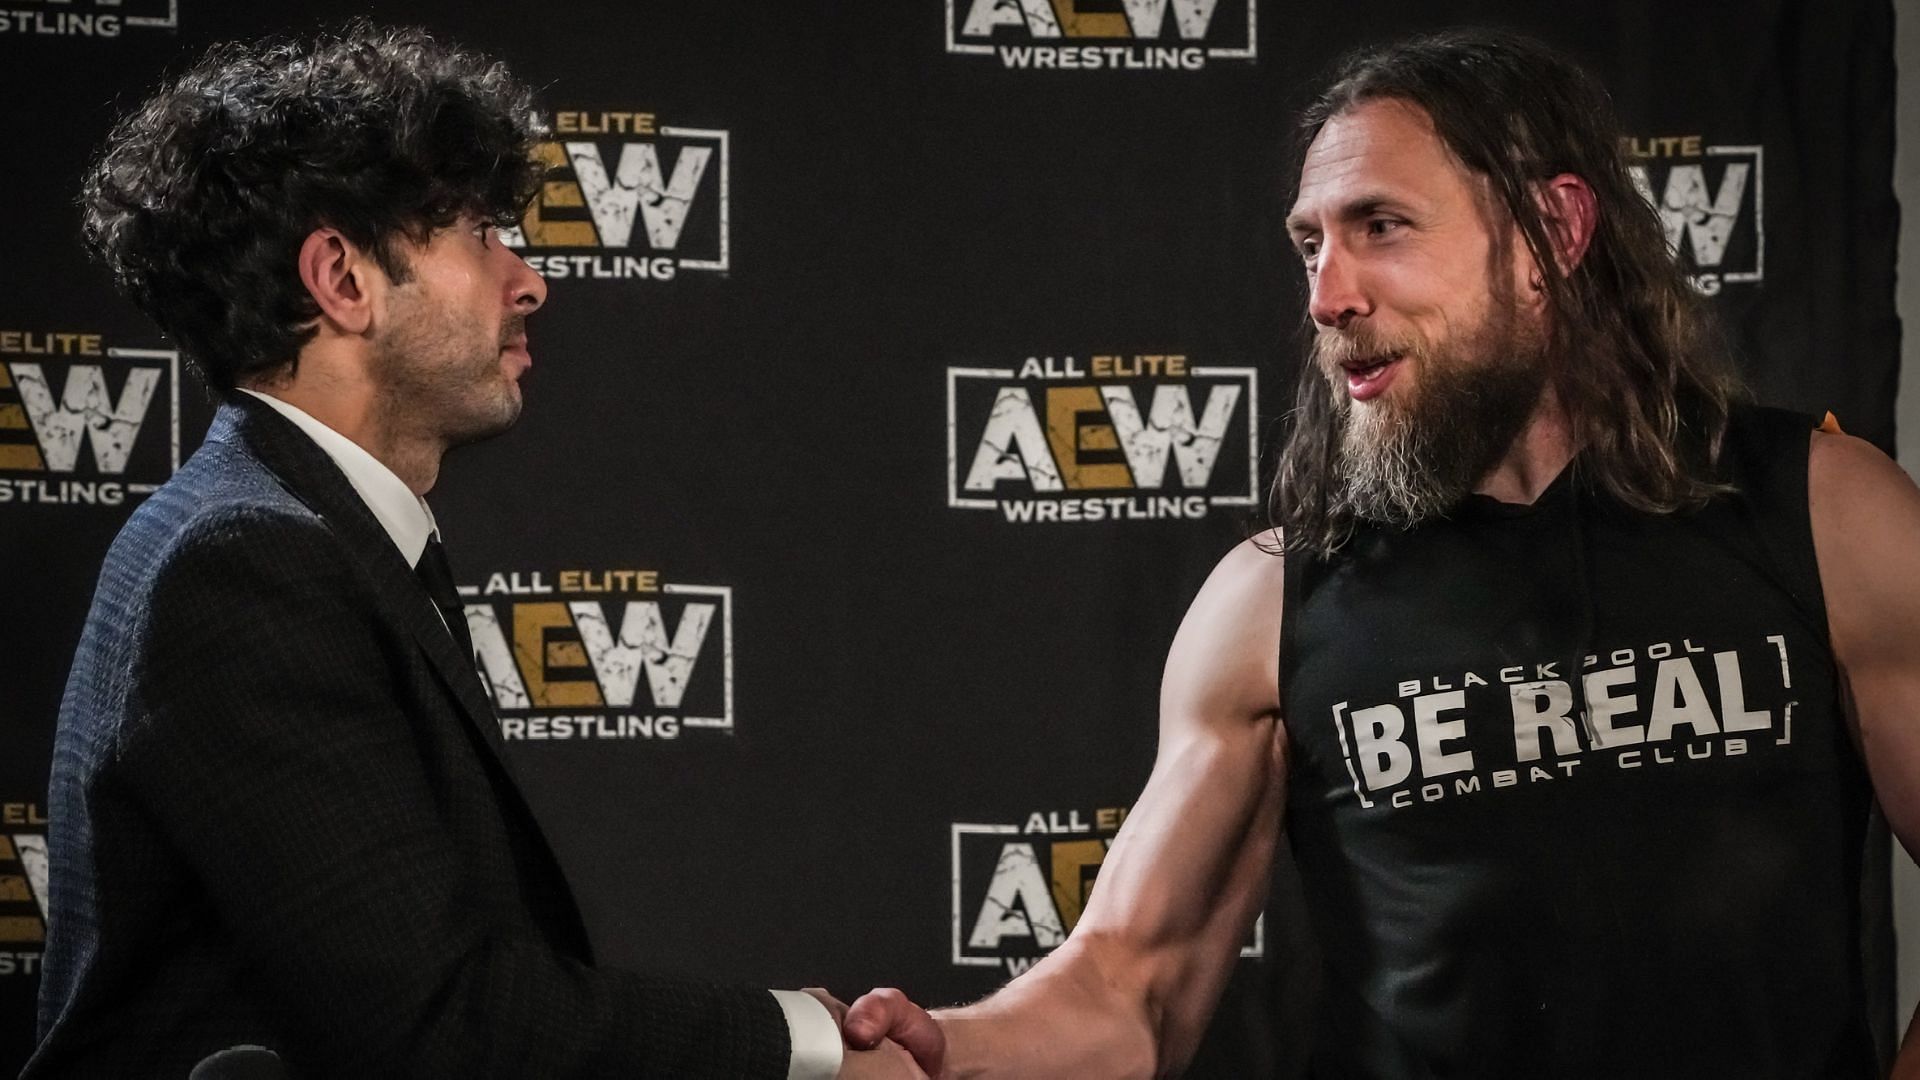 Tony Khan (left) and Bryan Danielson (right).